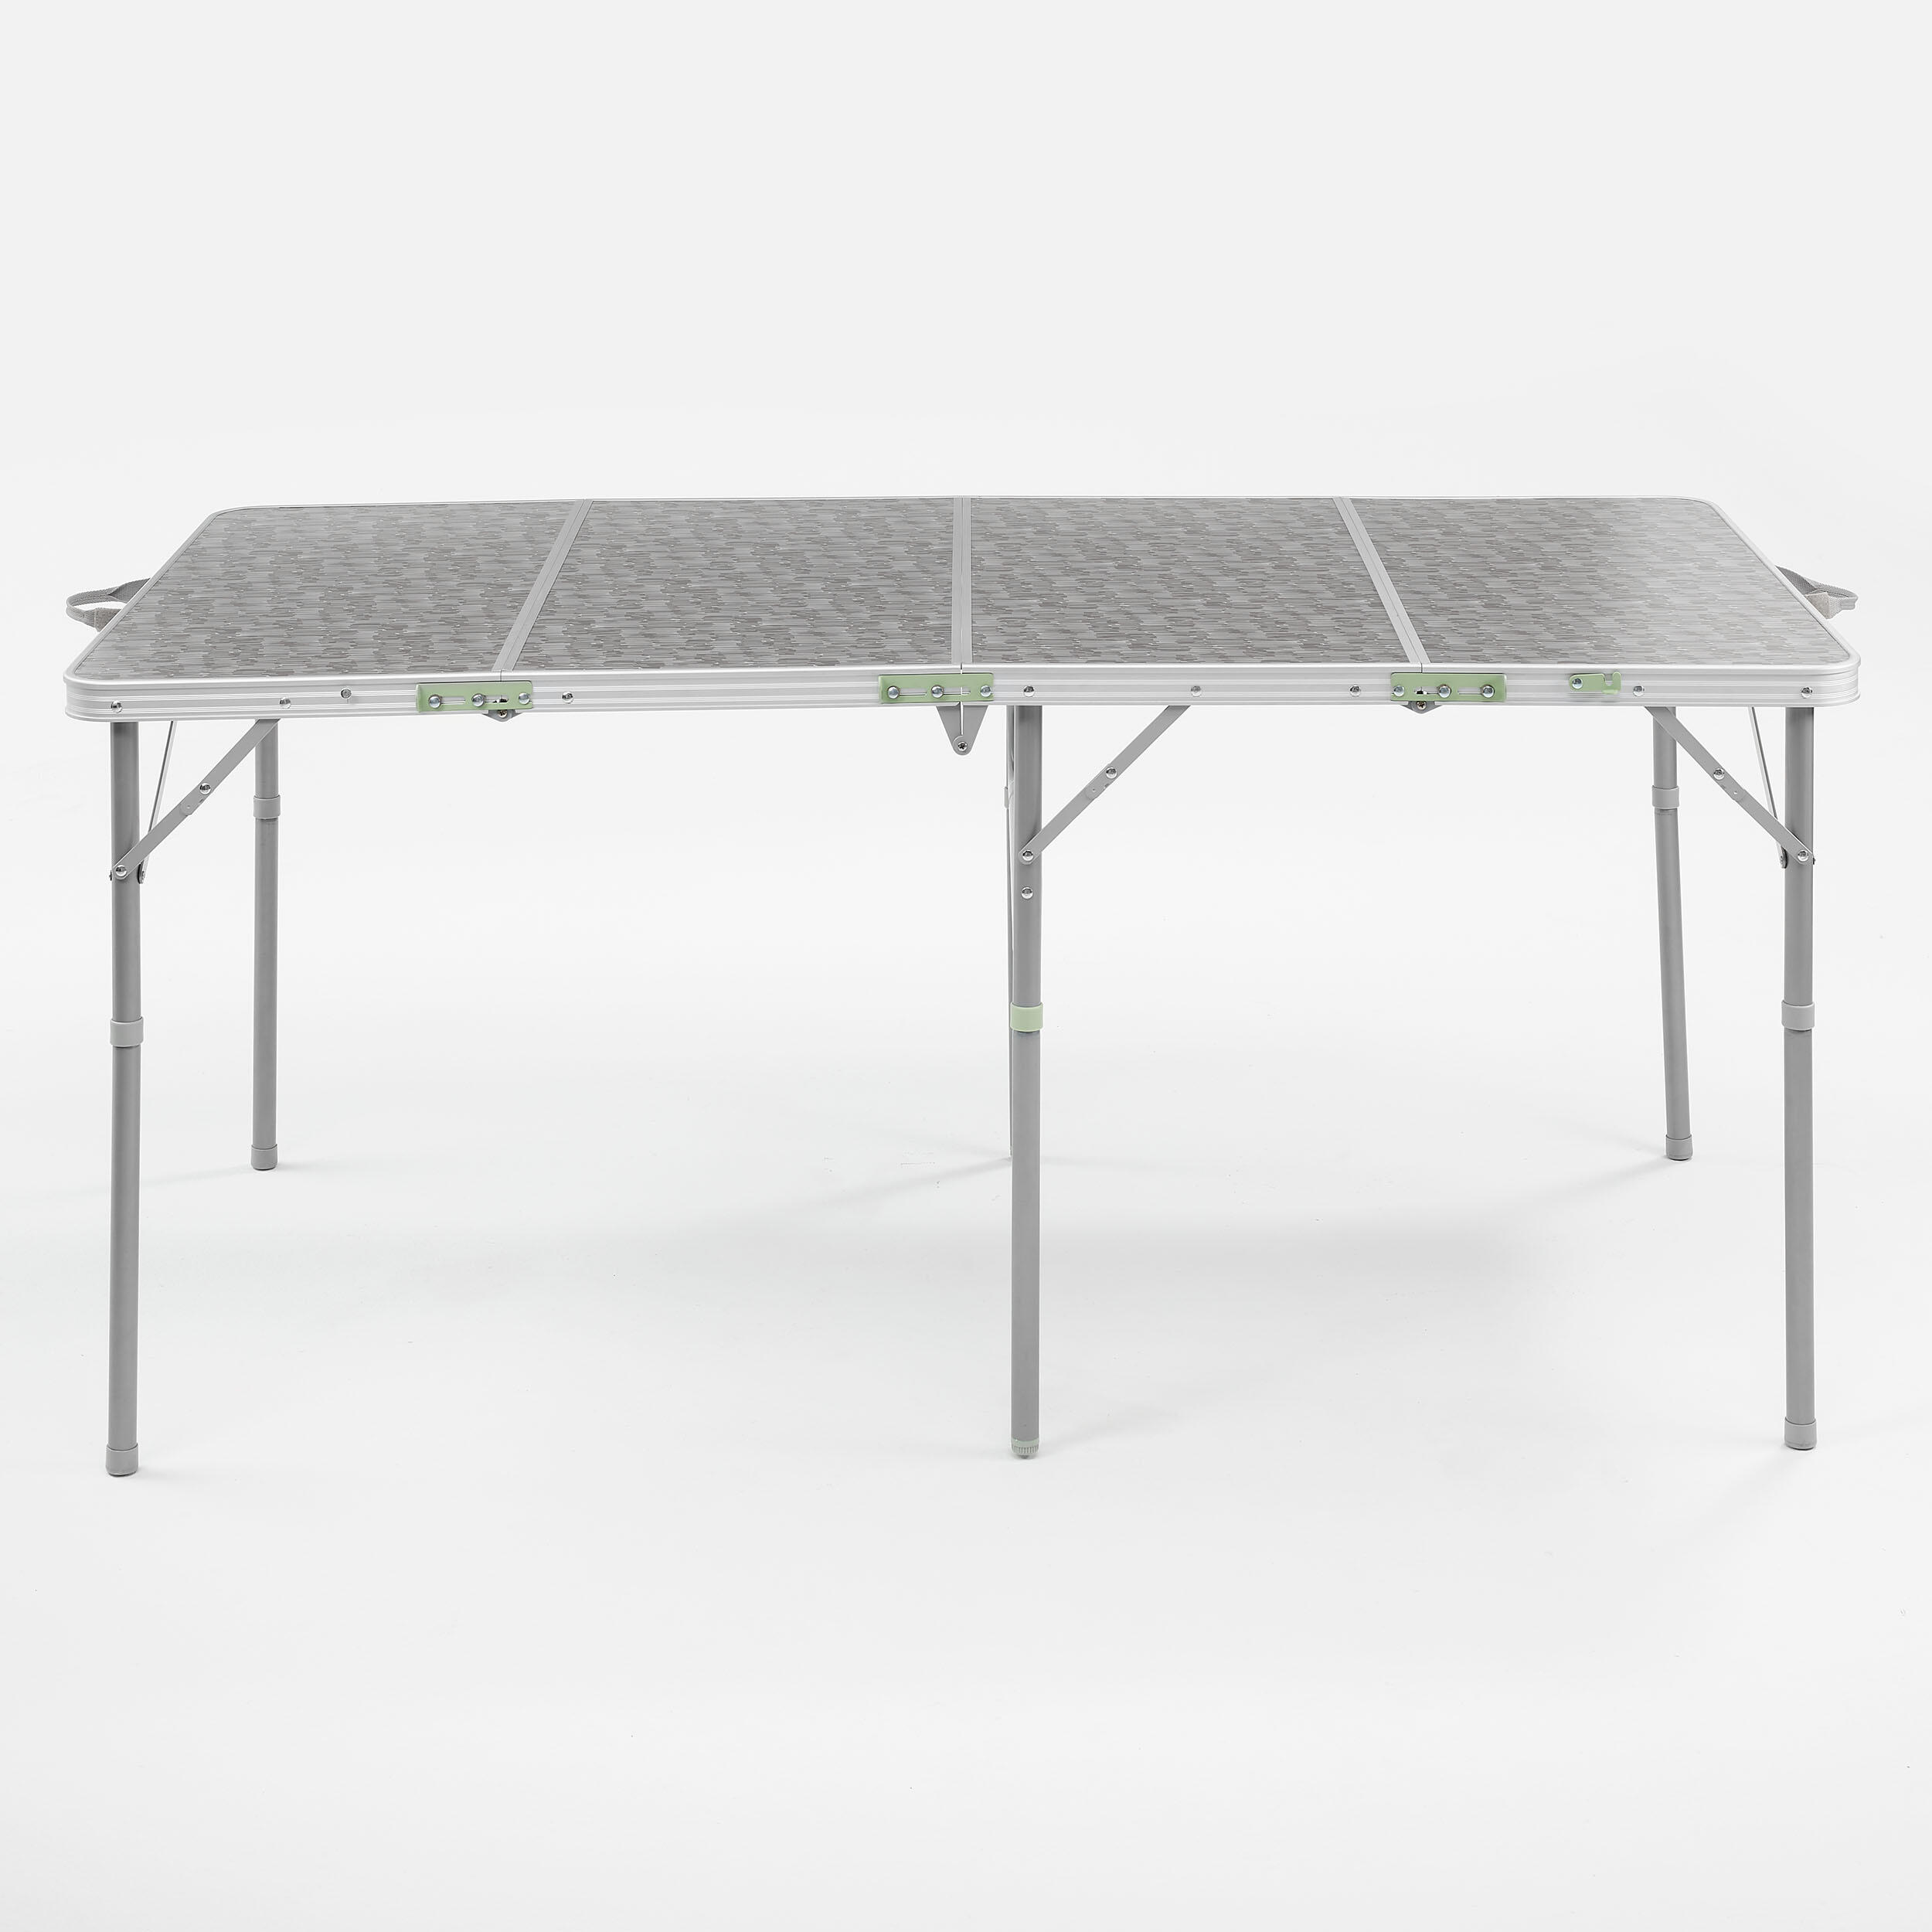 LARGE FOLDING CAMPING TABLE – 6 TO 8 PEOPLE 6/10